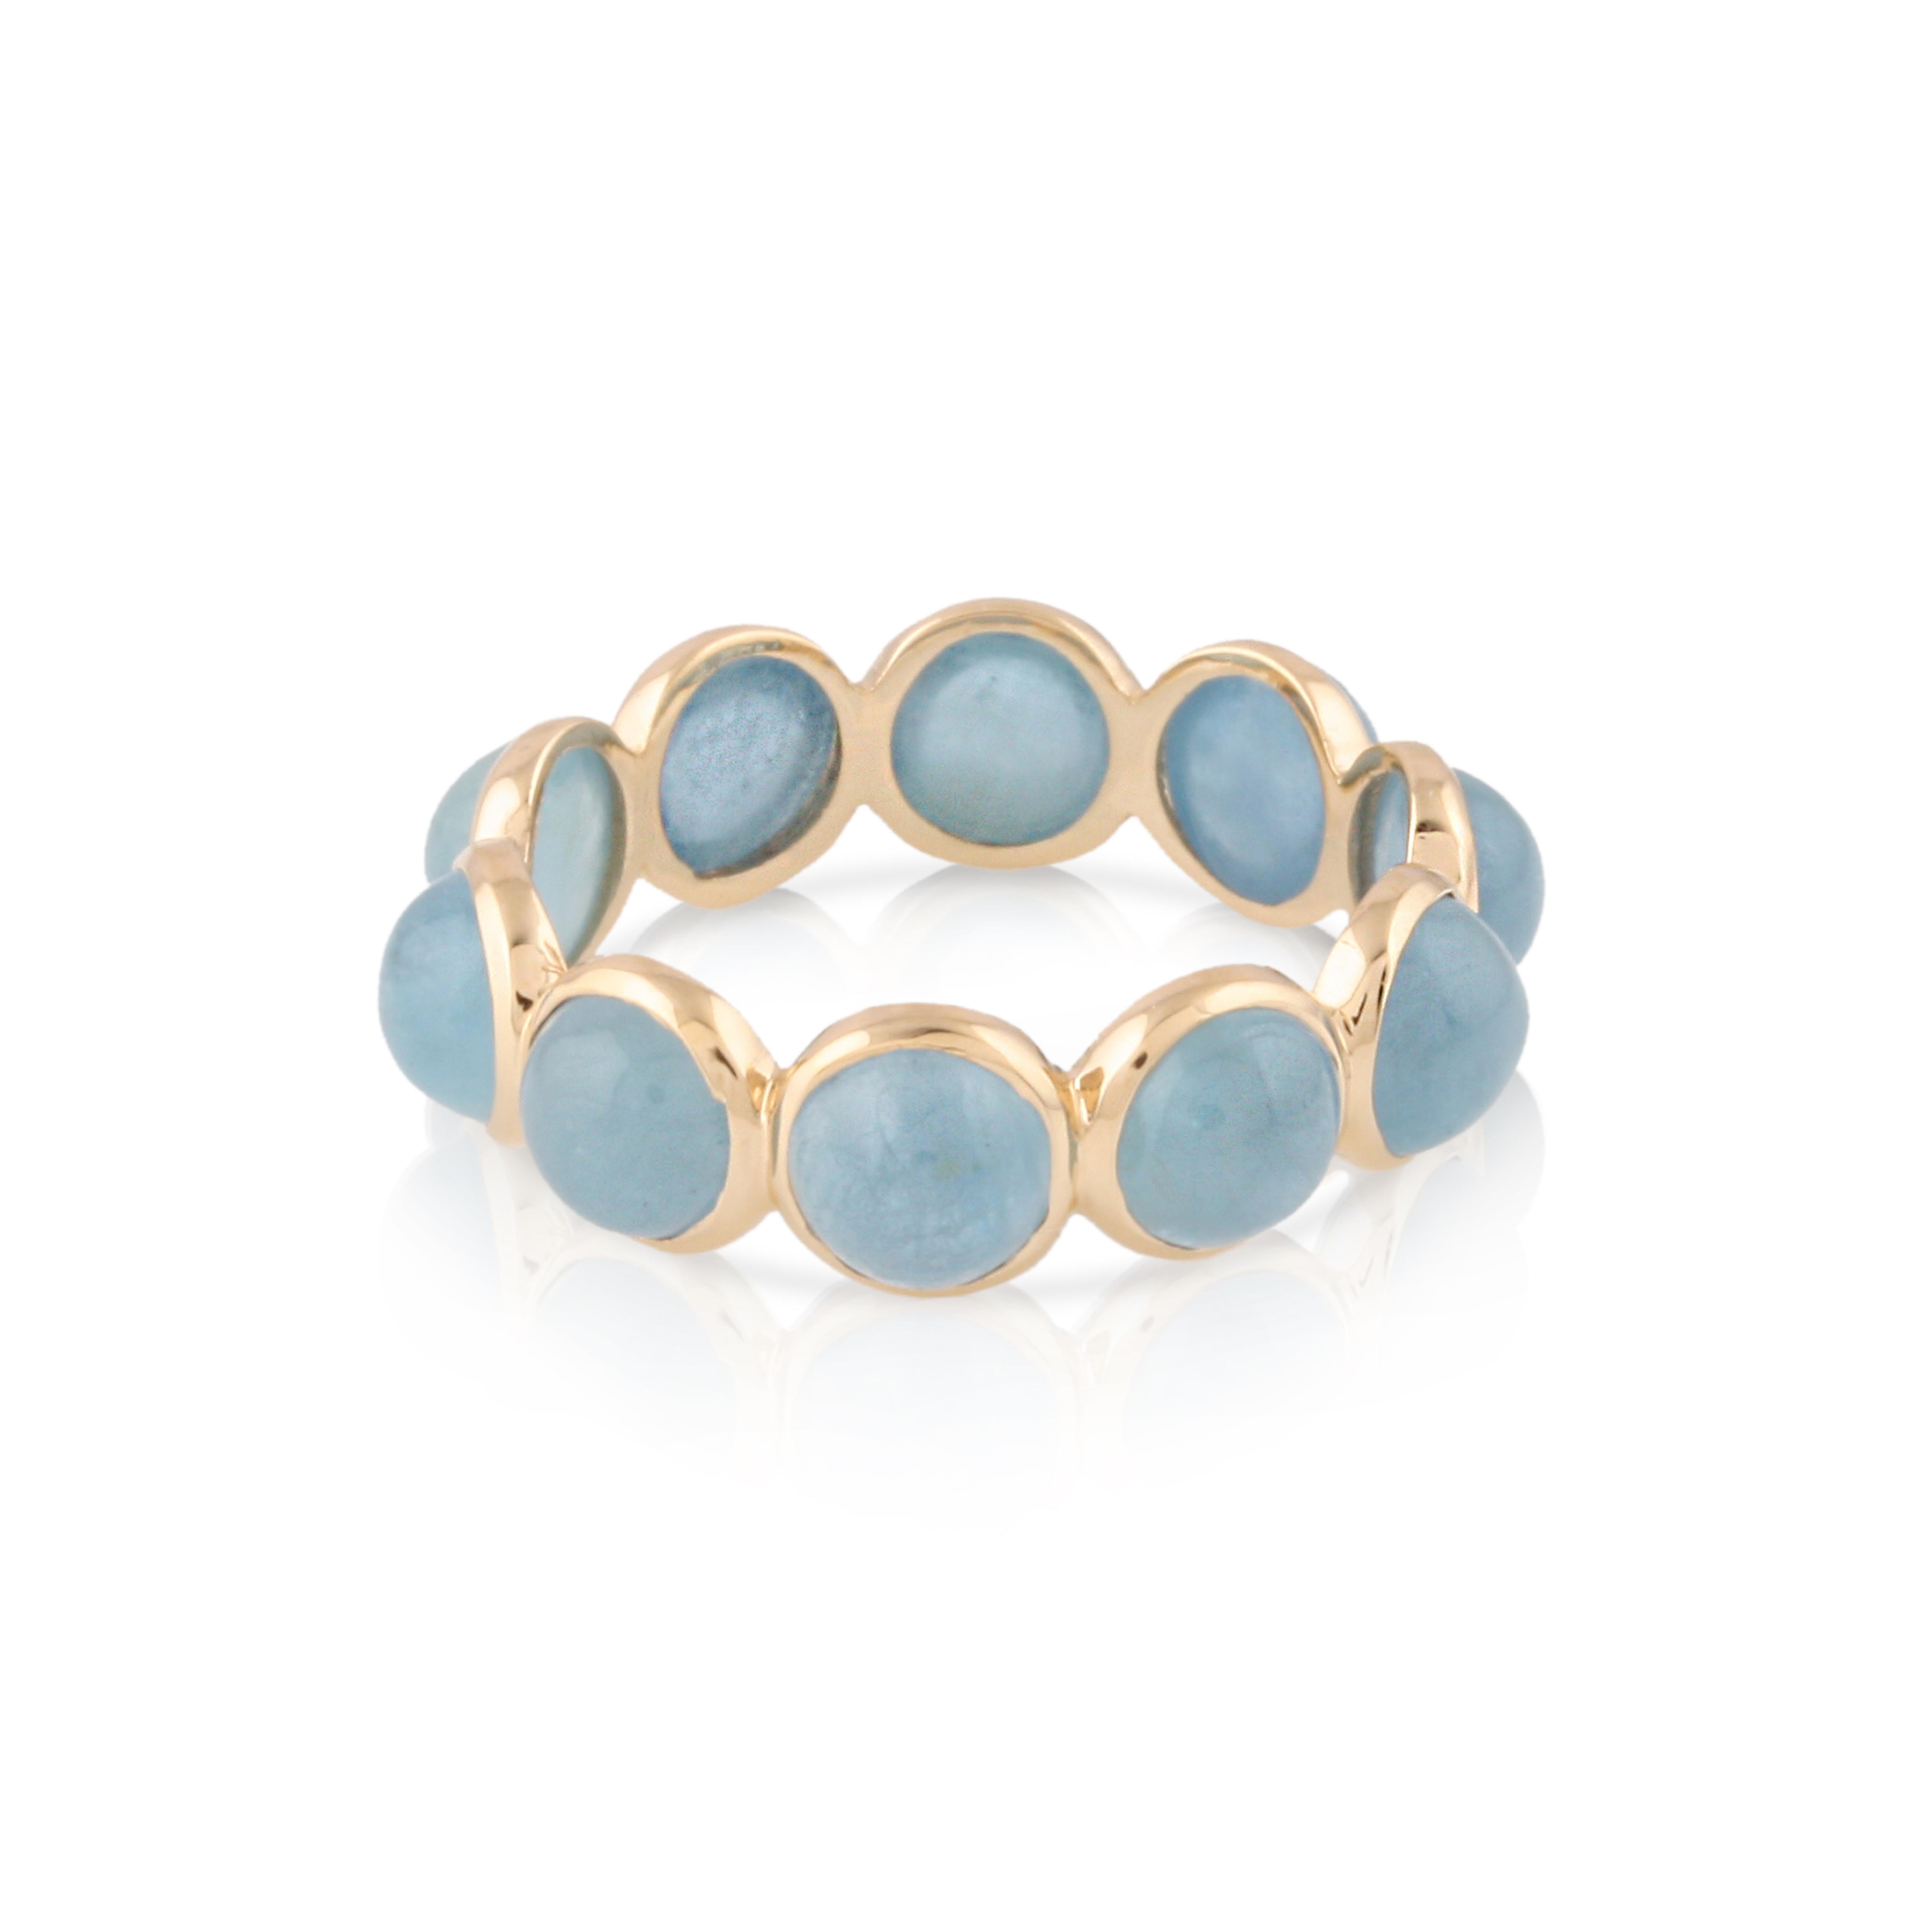 Tresor Beautiful Ring feature 6.41 carats of Aquamarine. The Ring are an ode to the luxurious yet classic beauty with sparkly gemstones and feminine hues. Their contemporary and modern design make them perfect and versatile to be worn at any